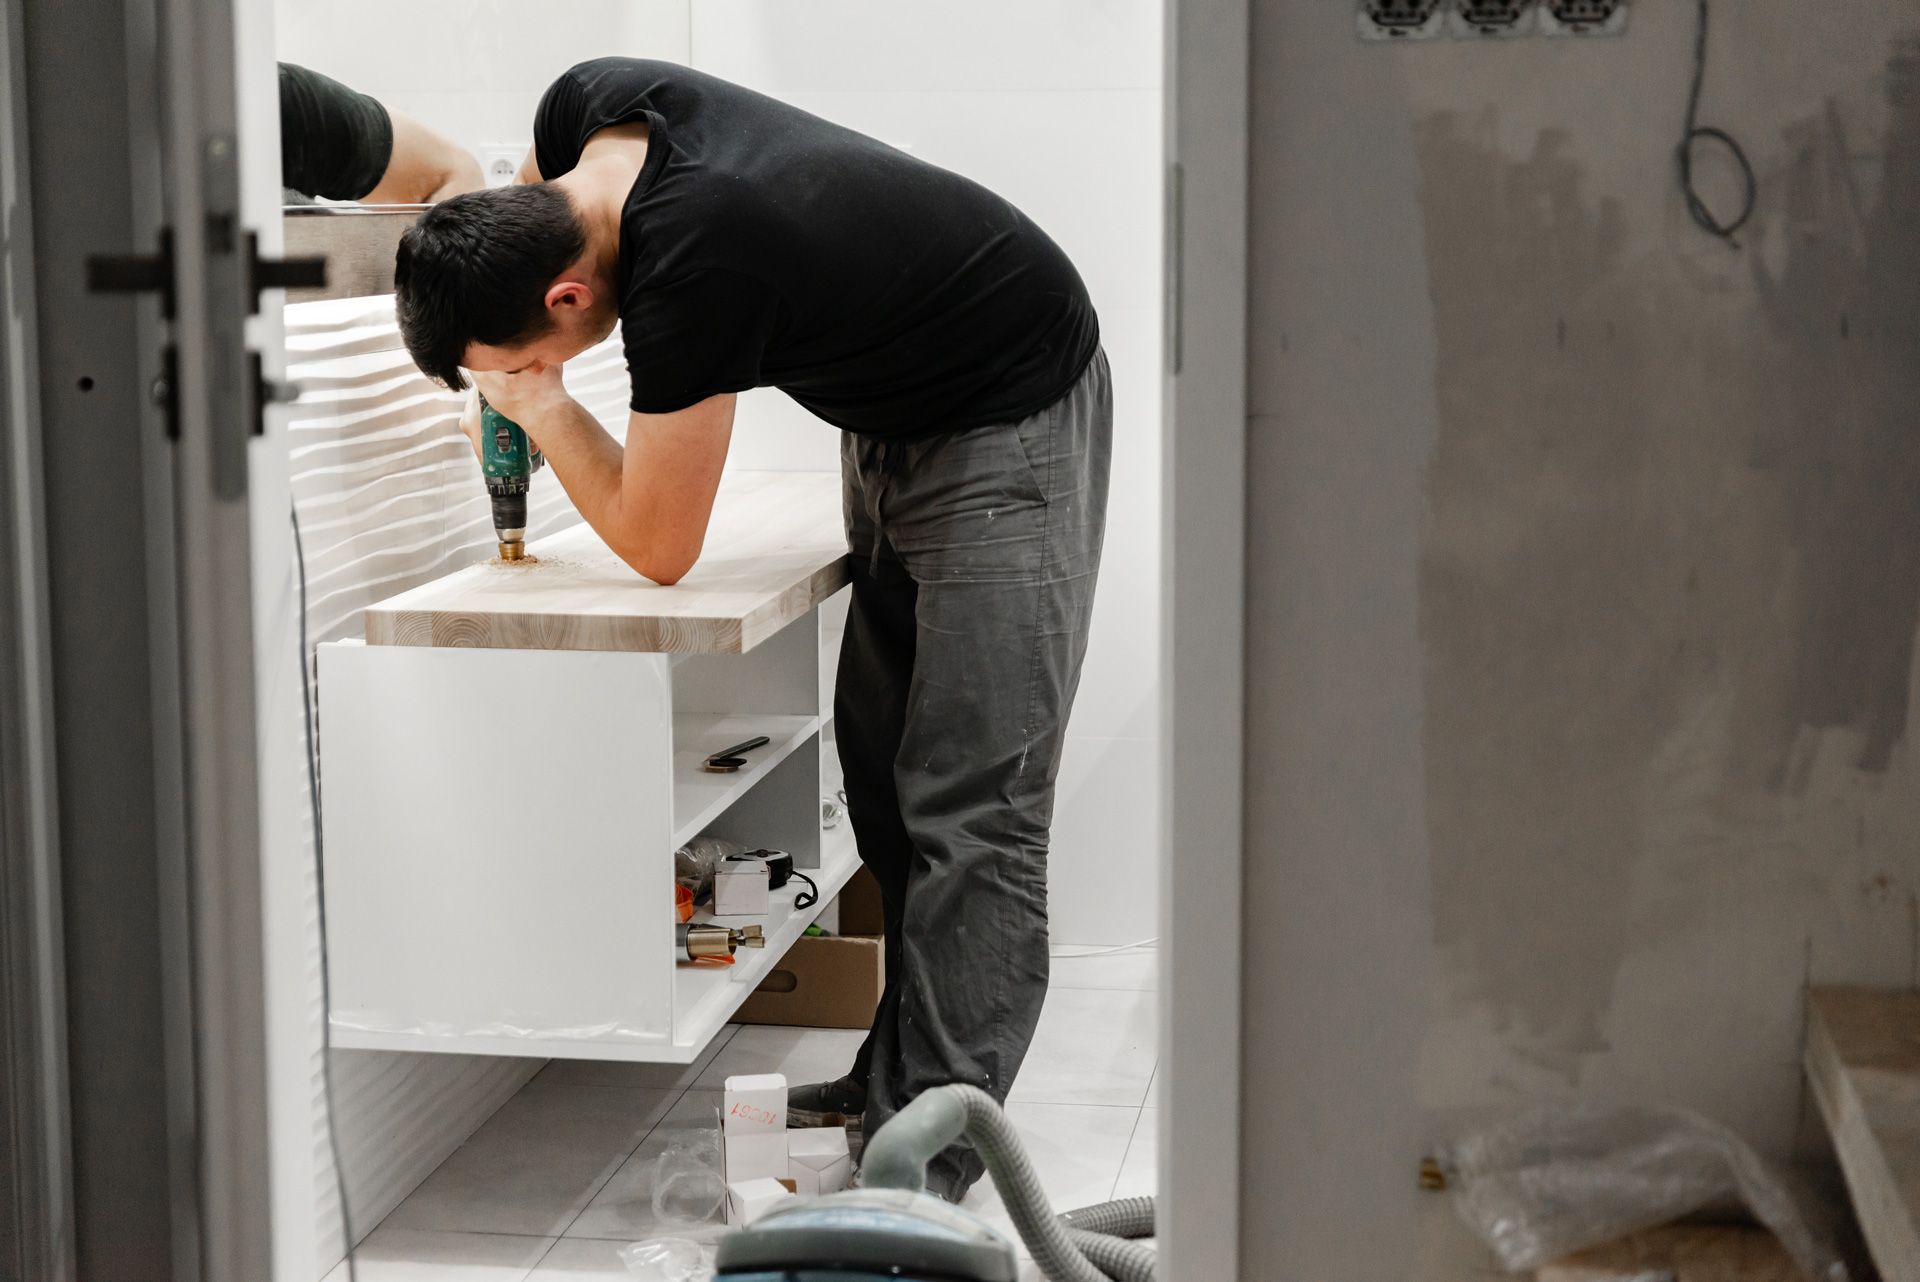 A man is using a drill to install a bathroom vanity.